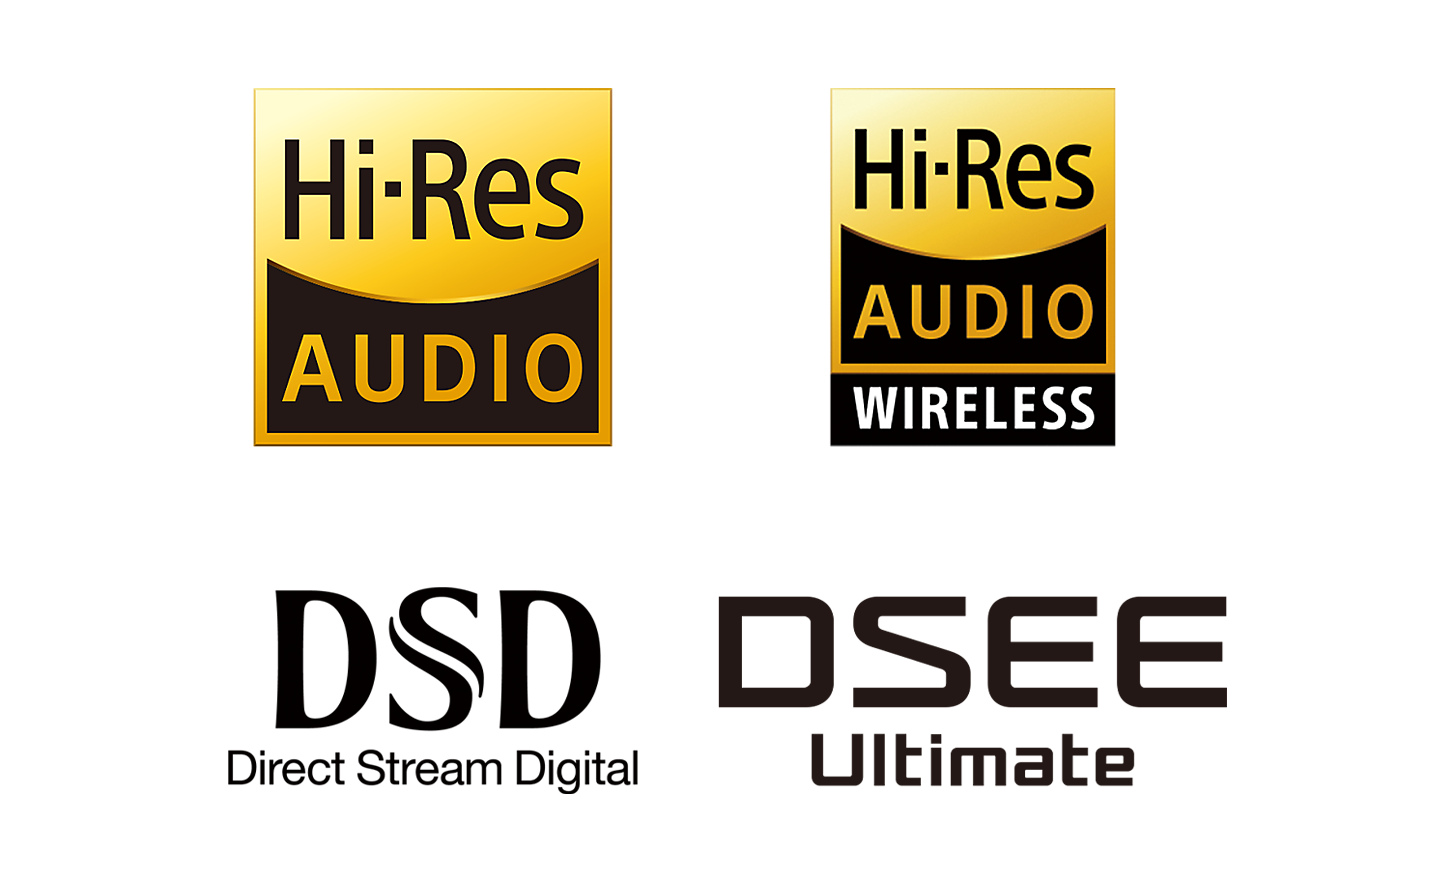 High-Res Audio, High-Res Audio WIRELESS, DSD and DSEE logo's.